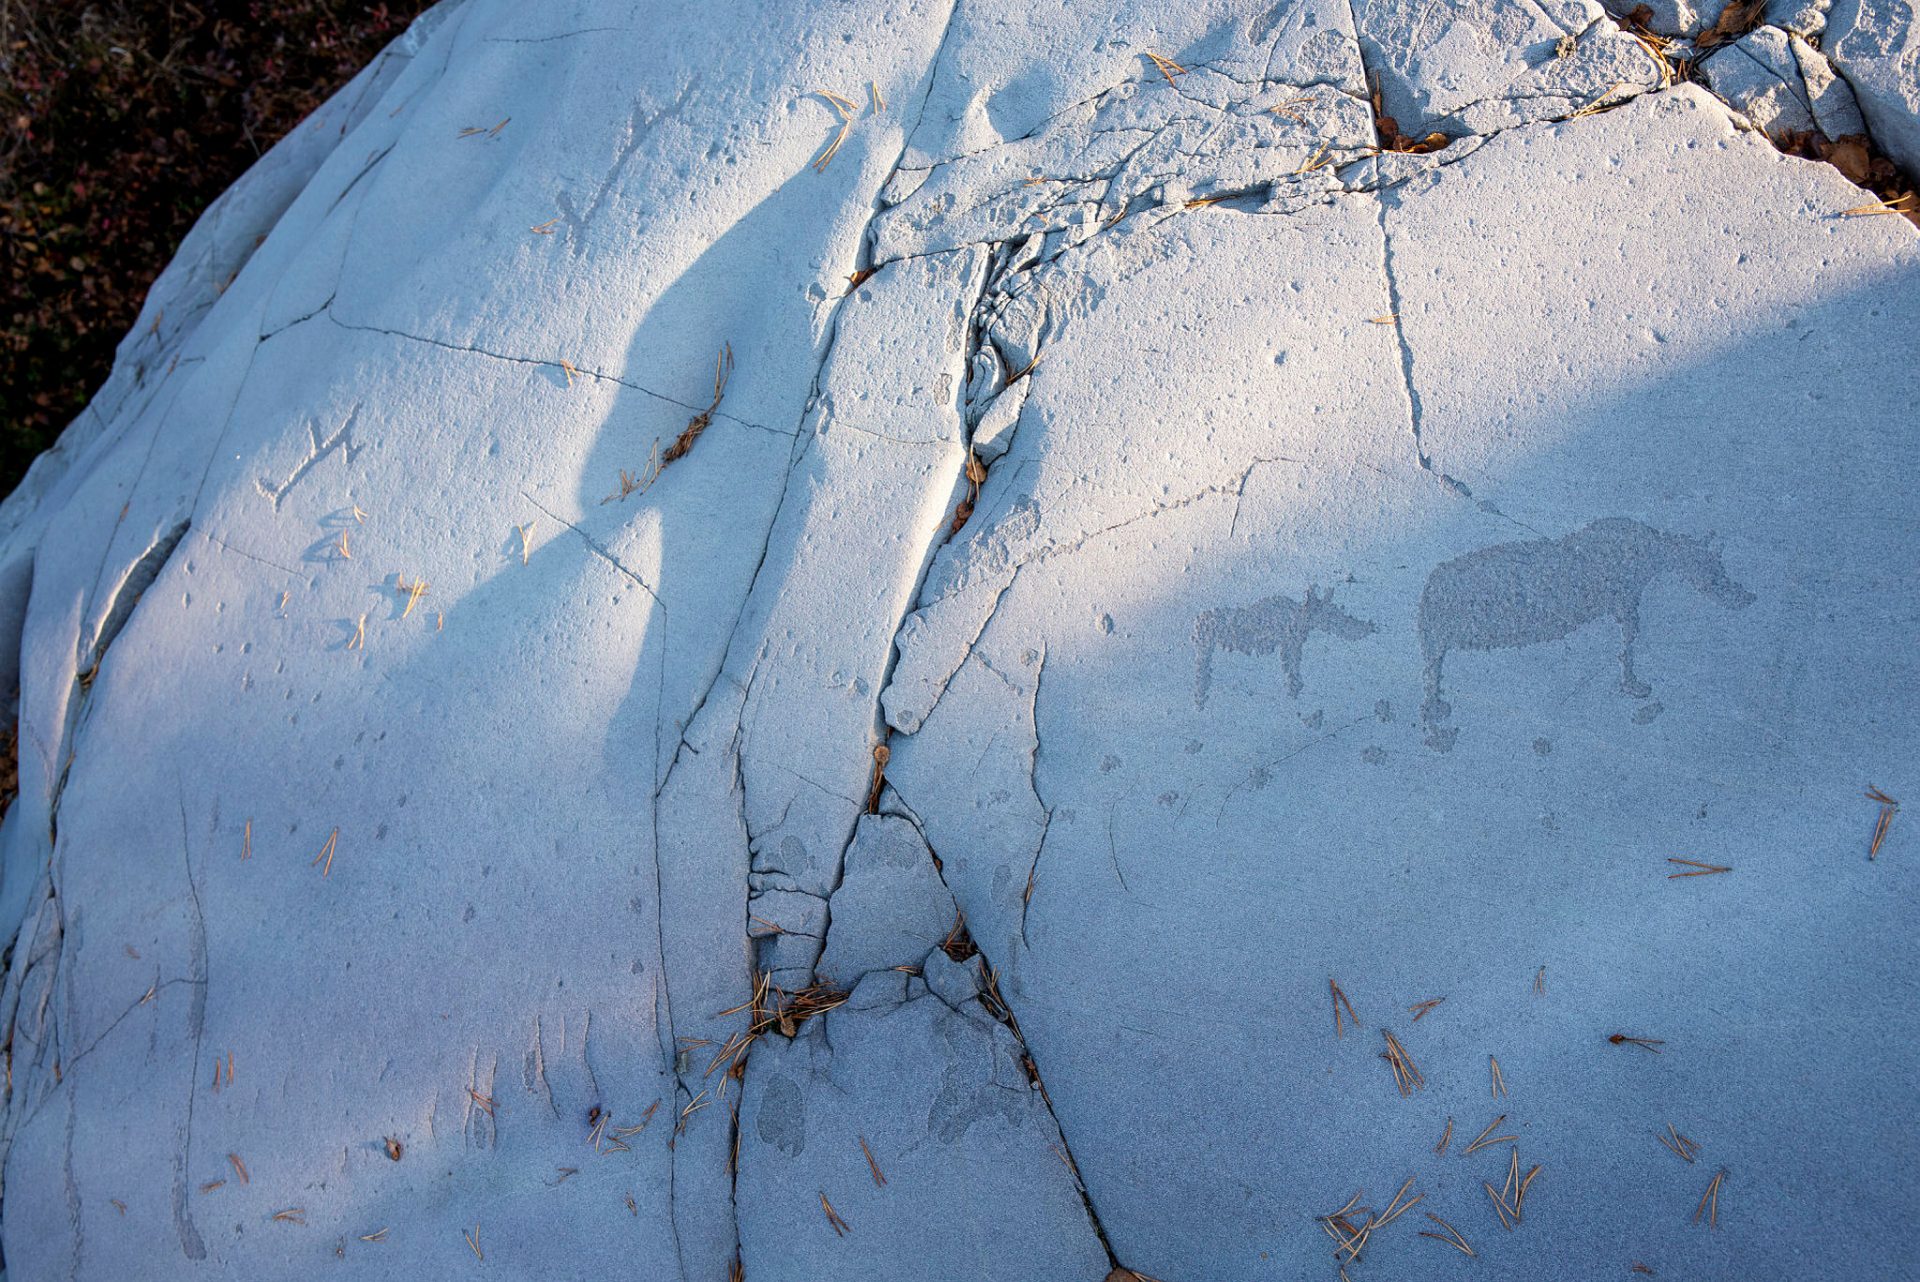 Rock carvings in Hjemmeluft in Alta: Bear and bear cub with bear tracks. Photo: Arve Kjersheim, the Dircetorate for Cultural Heritage